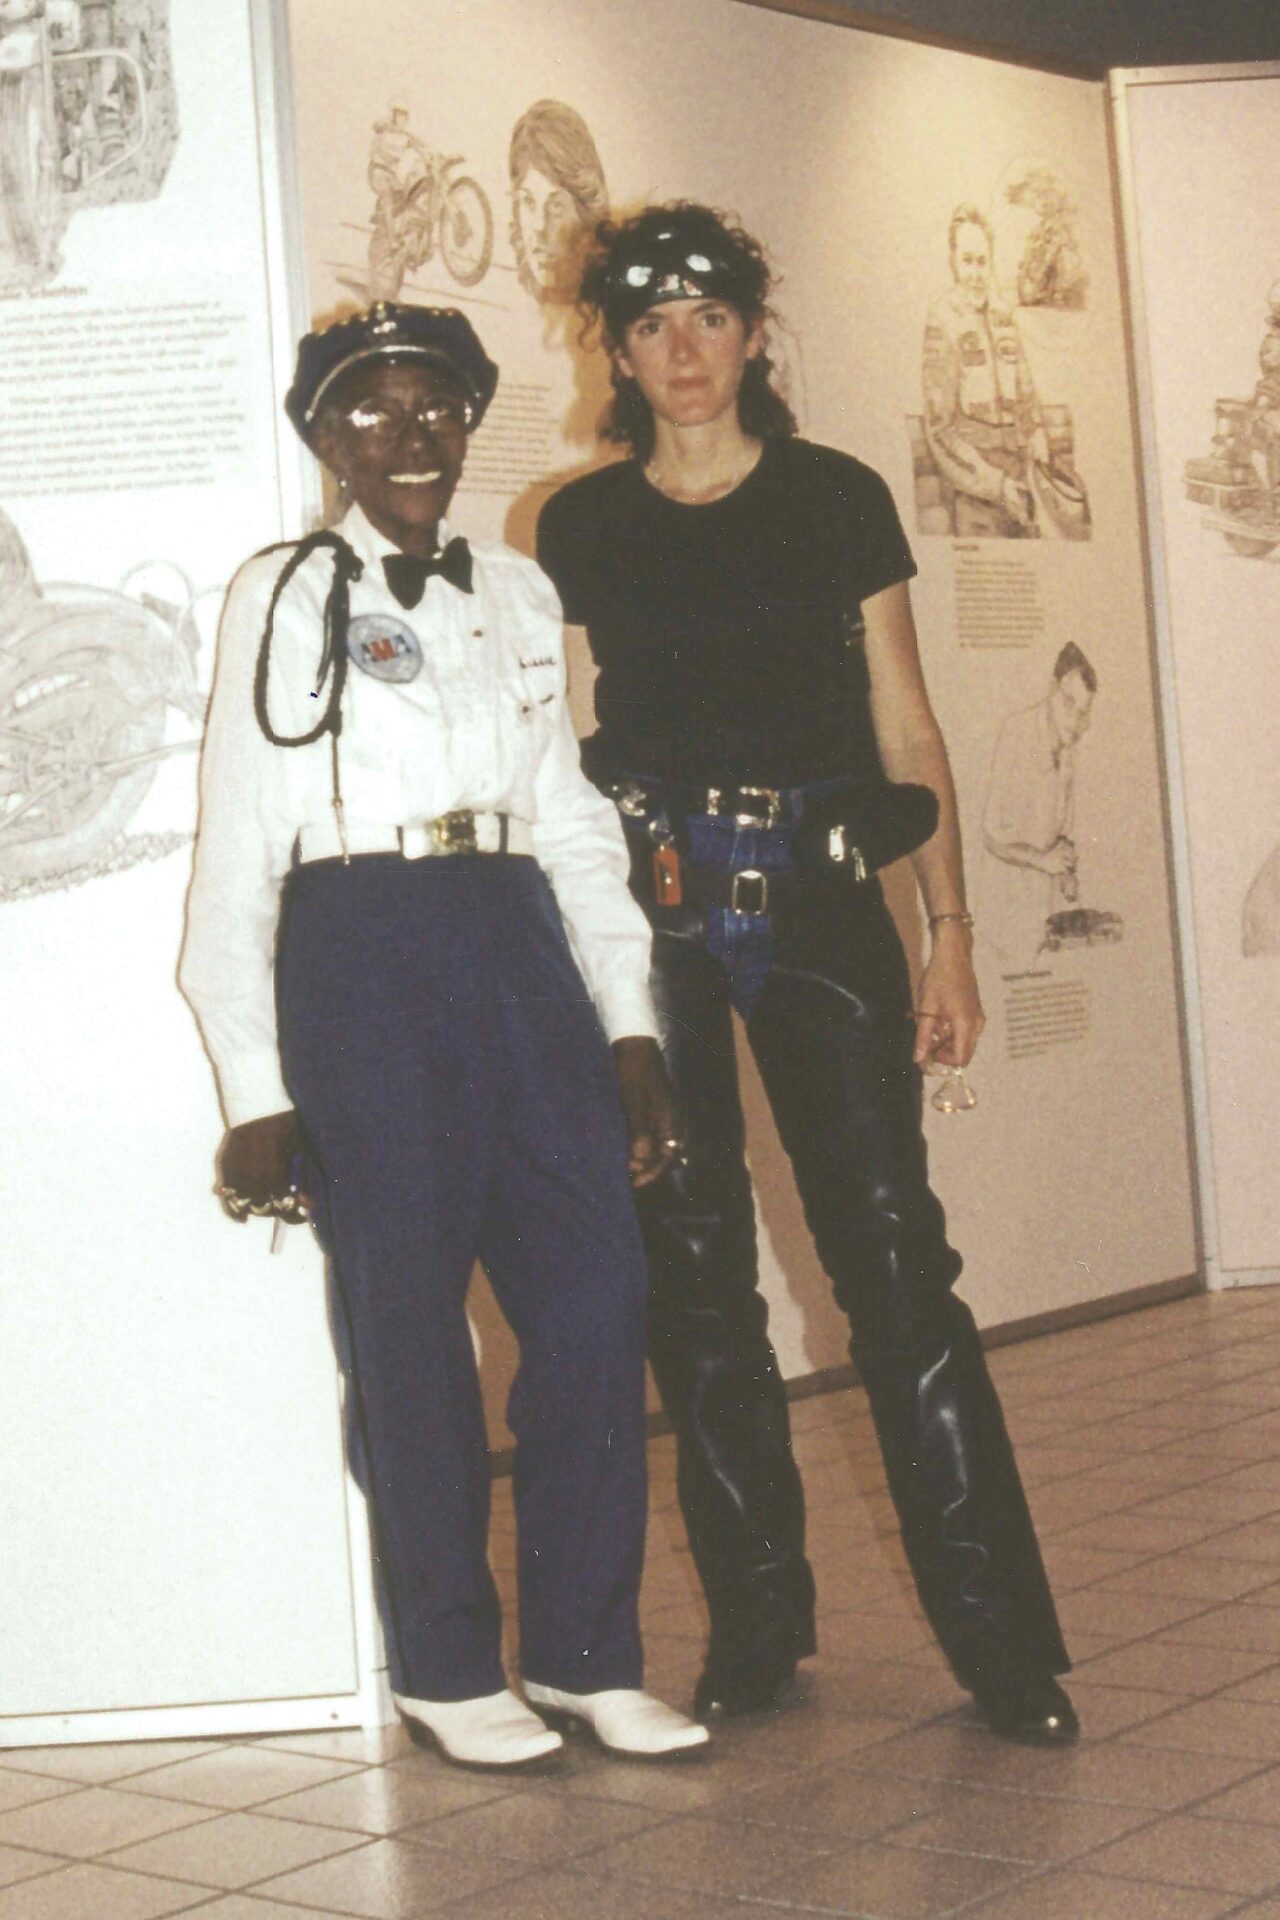 Bessie Stringfield (left) with Ann Ferrar, her biographer and friend, on the day they met in the summer of 1990. The author's coming book is <i>African American Queen of the Road: Bessie Stringfield—A Woman's Journey Through Faith, Resilience and the Road </i>. Expanding on Ferrar's earlier published stories of Bessie, the book is Stringfield's definitive biography. Bessie kept this photo on top of her old box TV set in her Miami home. Ann still keeps her copy above her writing desk. Photo by Becky Brown, Founder, Women in the Wind.